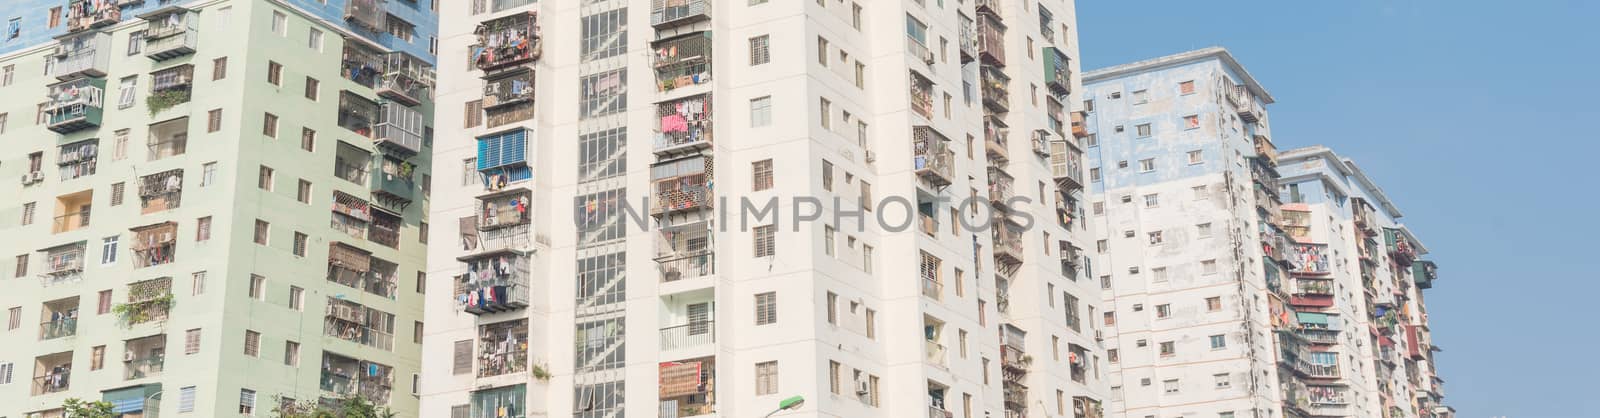 Panoramic lookup typical condos with hanging clothes over blue sky in Hanoi, Vietnam by trongnguyen